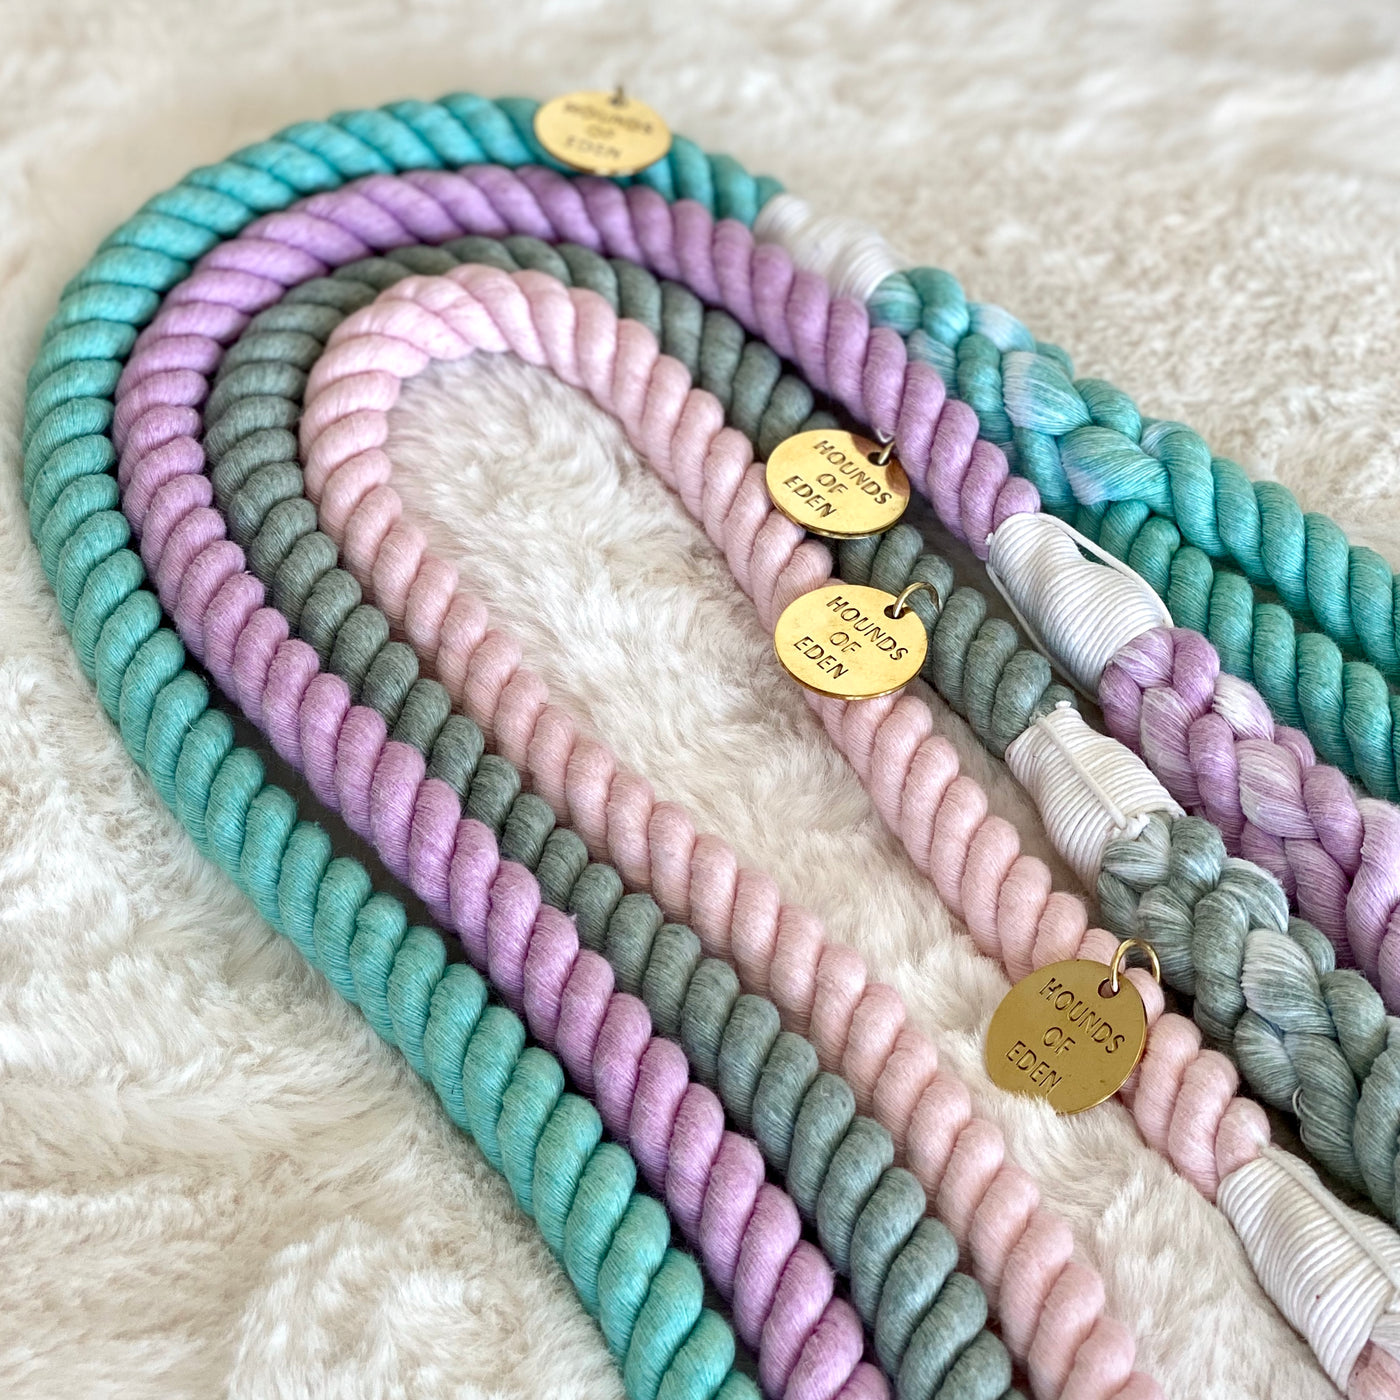 Pure Peony Pink Cotton Rope Lead - Gold Hardware